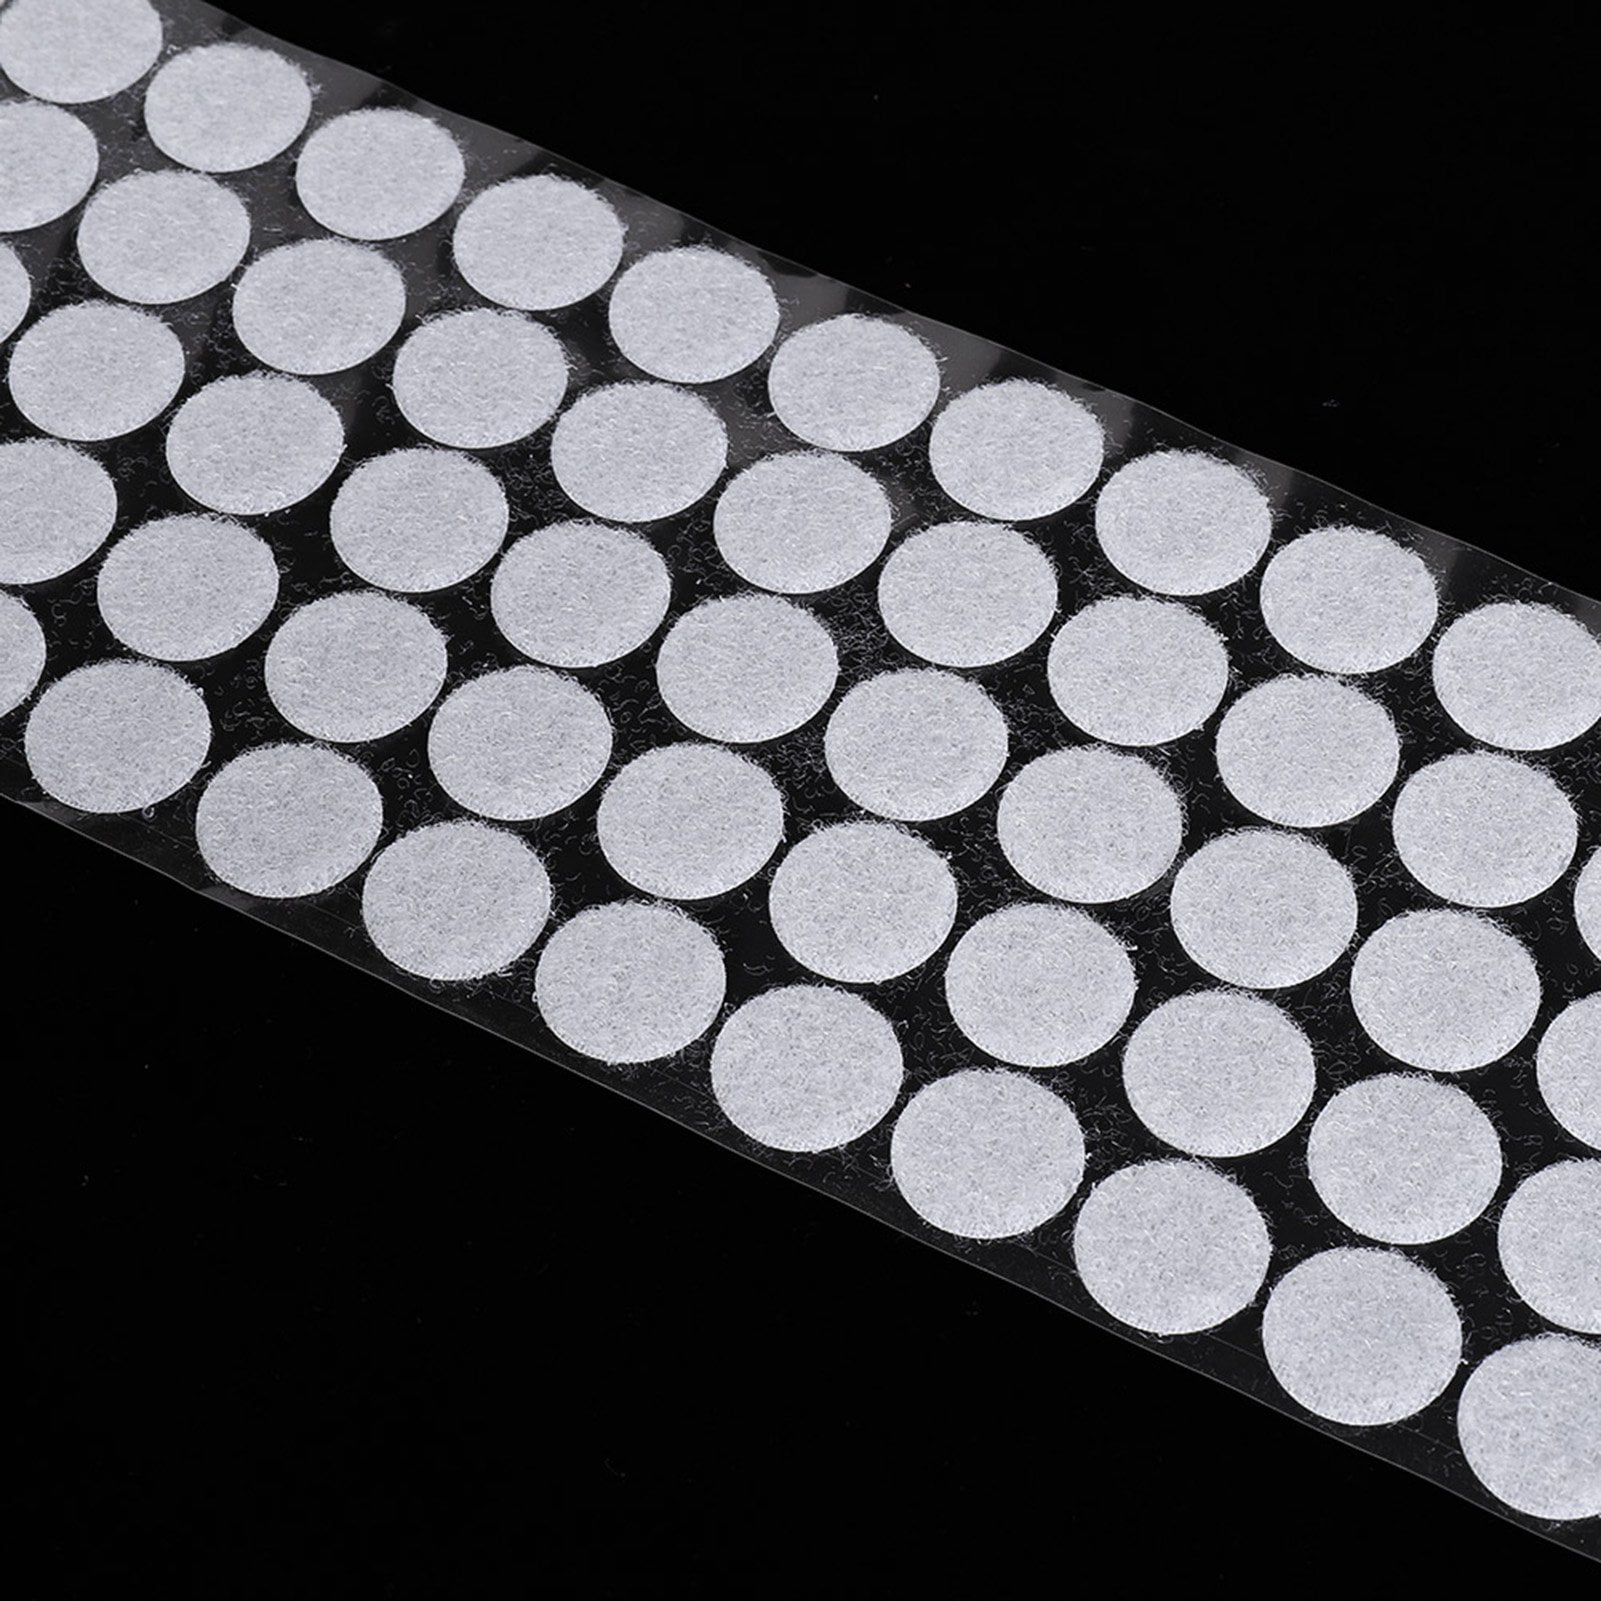 1000 Pcs 20mm Self-Adhesive Velcro Dots Glue Dots for Paper, Plastic, Glass,Leather, Metal, Garments(White)